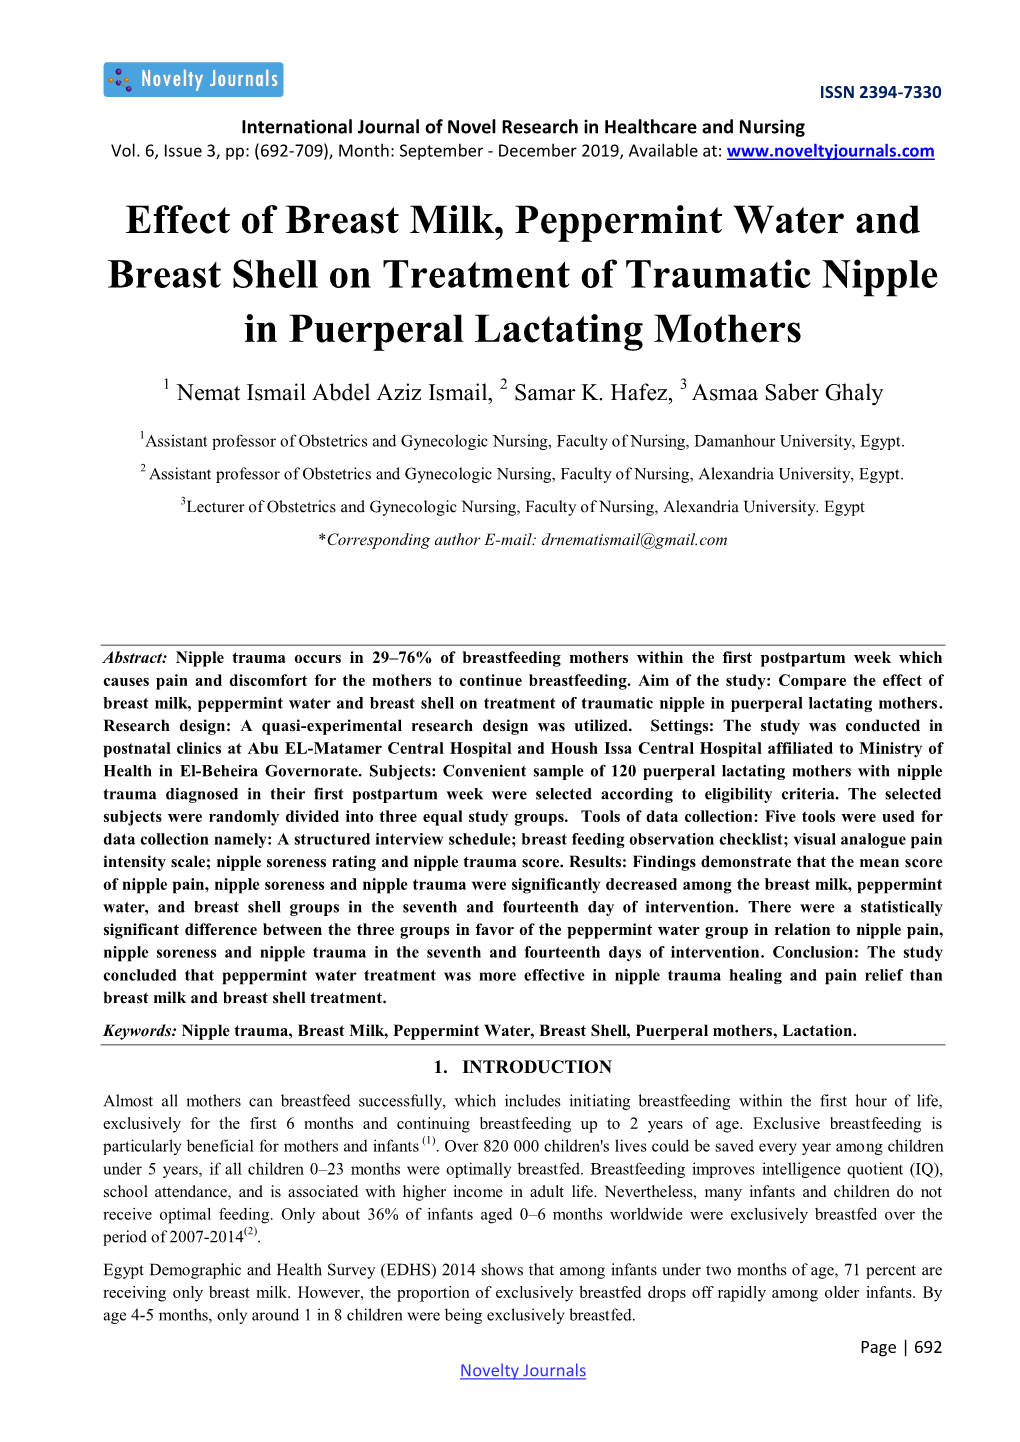 Effect of Breast Milk, Peppermint Water and Breast Shell on Treatment of Traumatic Nipple in Puerperal Lactating Mothers